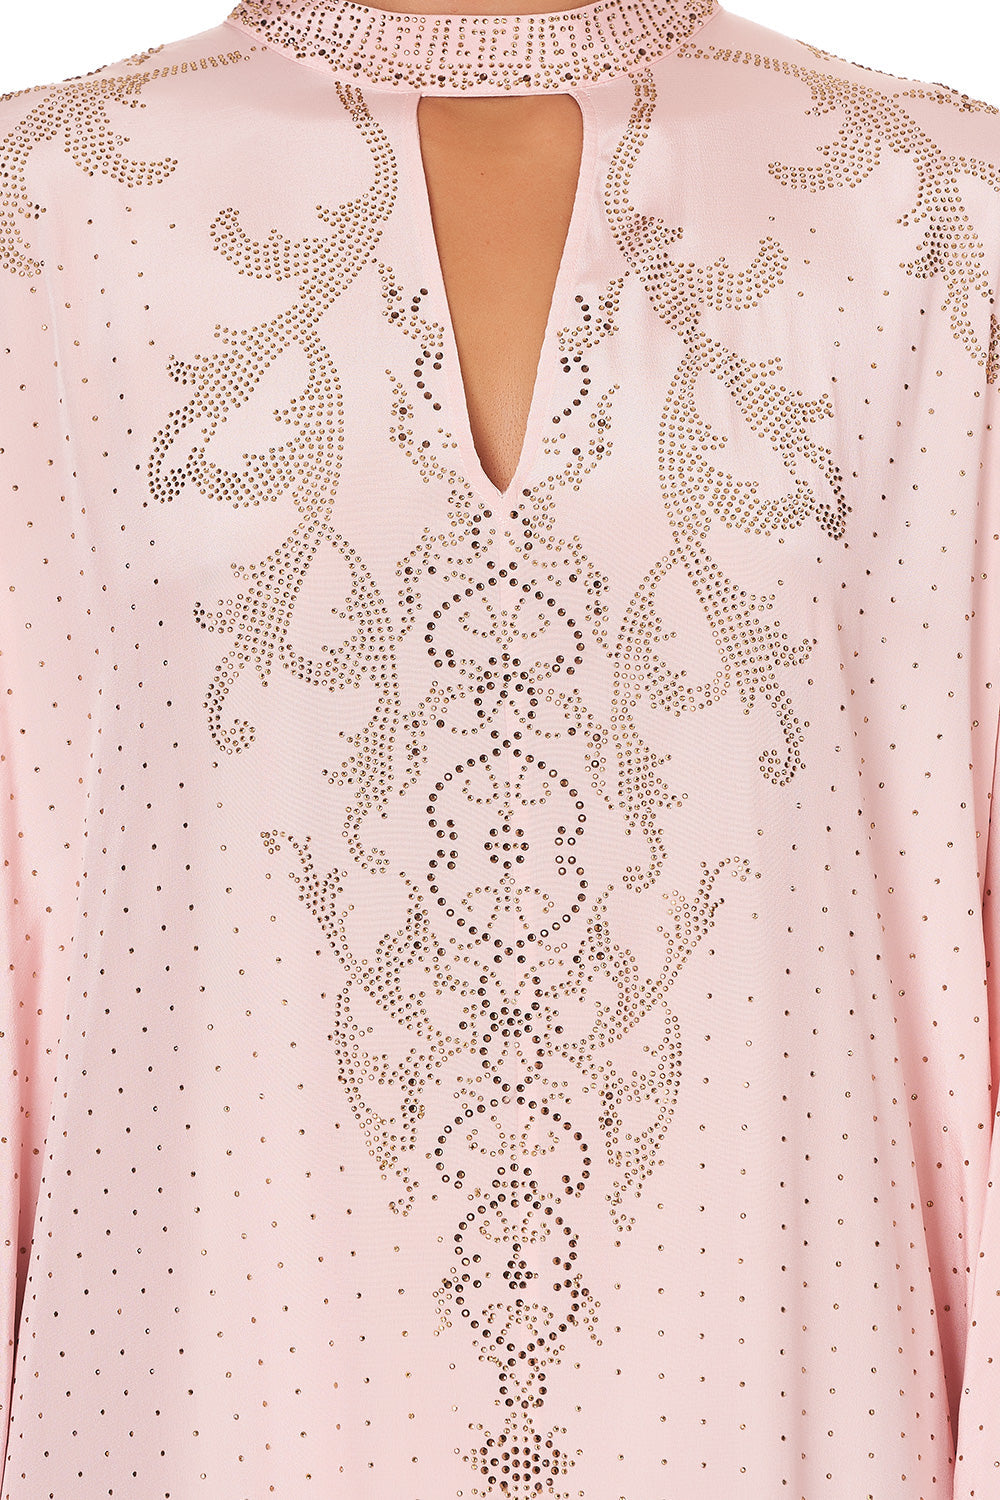 KAFTAN WITH HIGH COLLAR STAND LUXE PINK